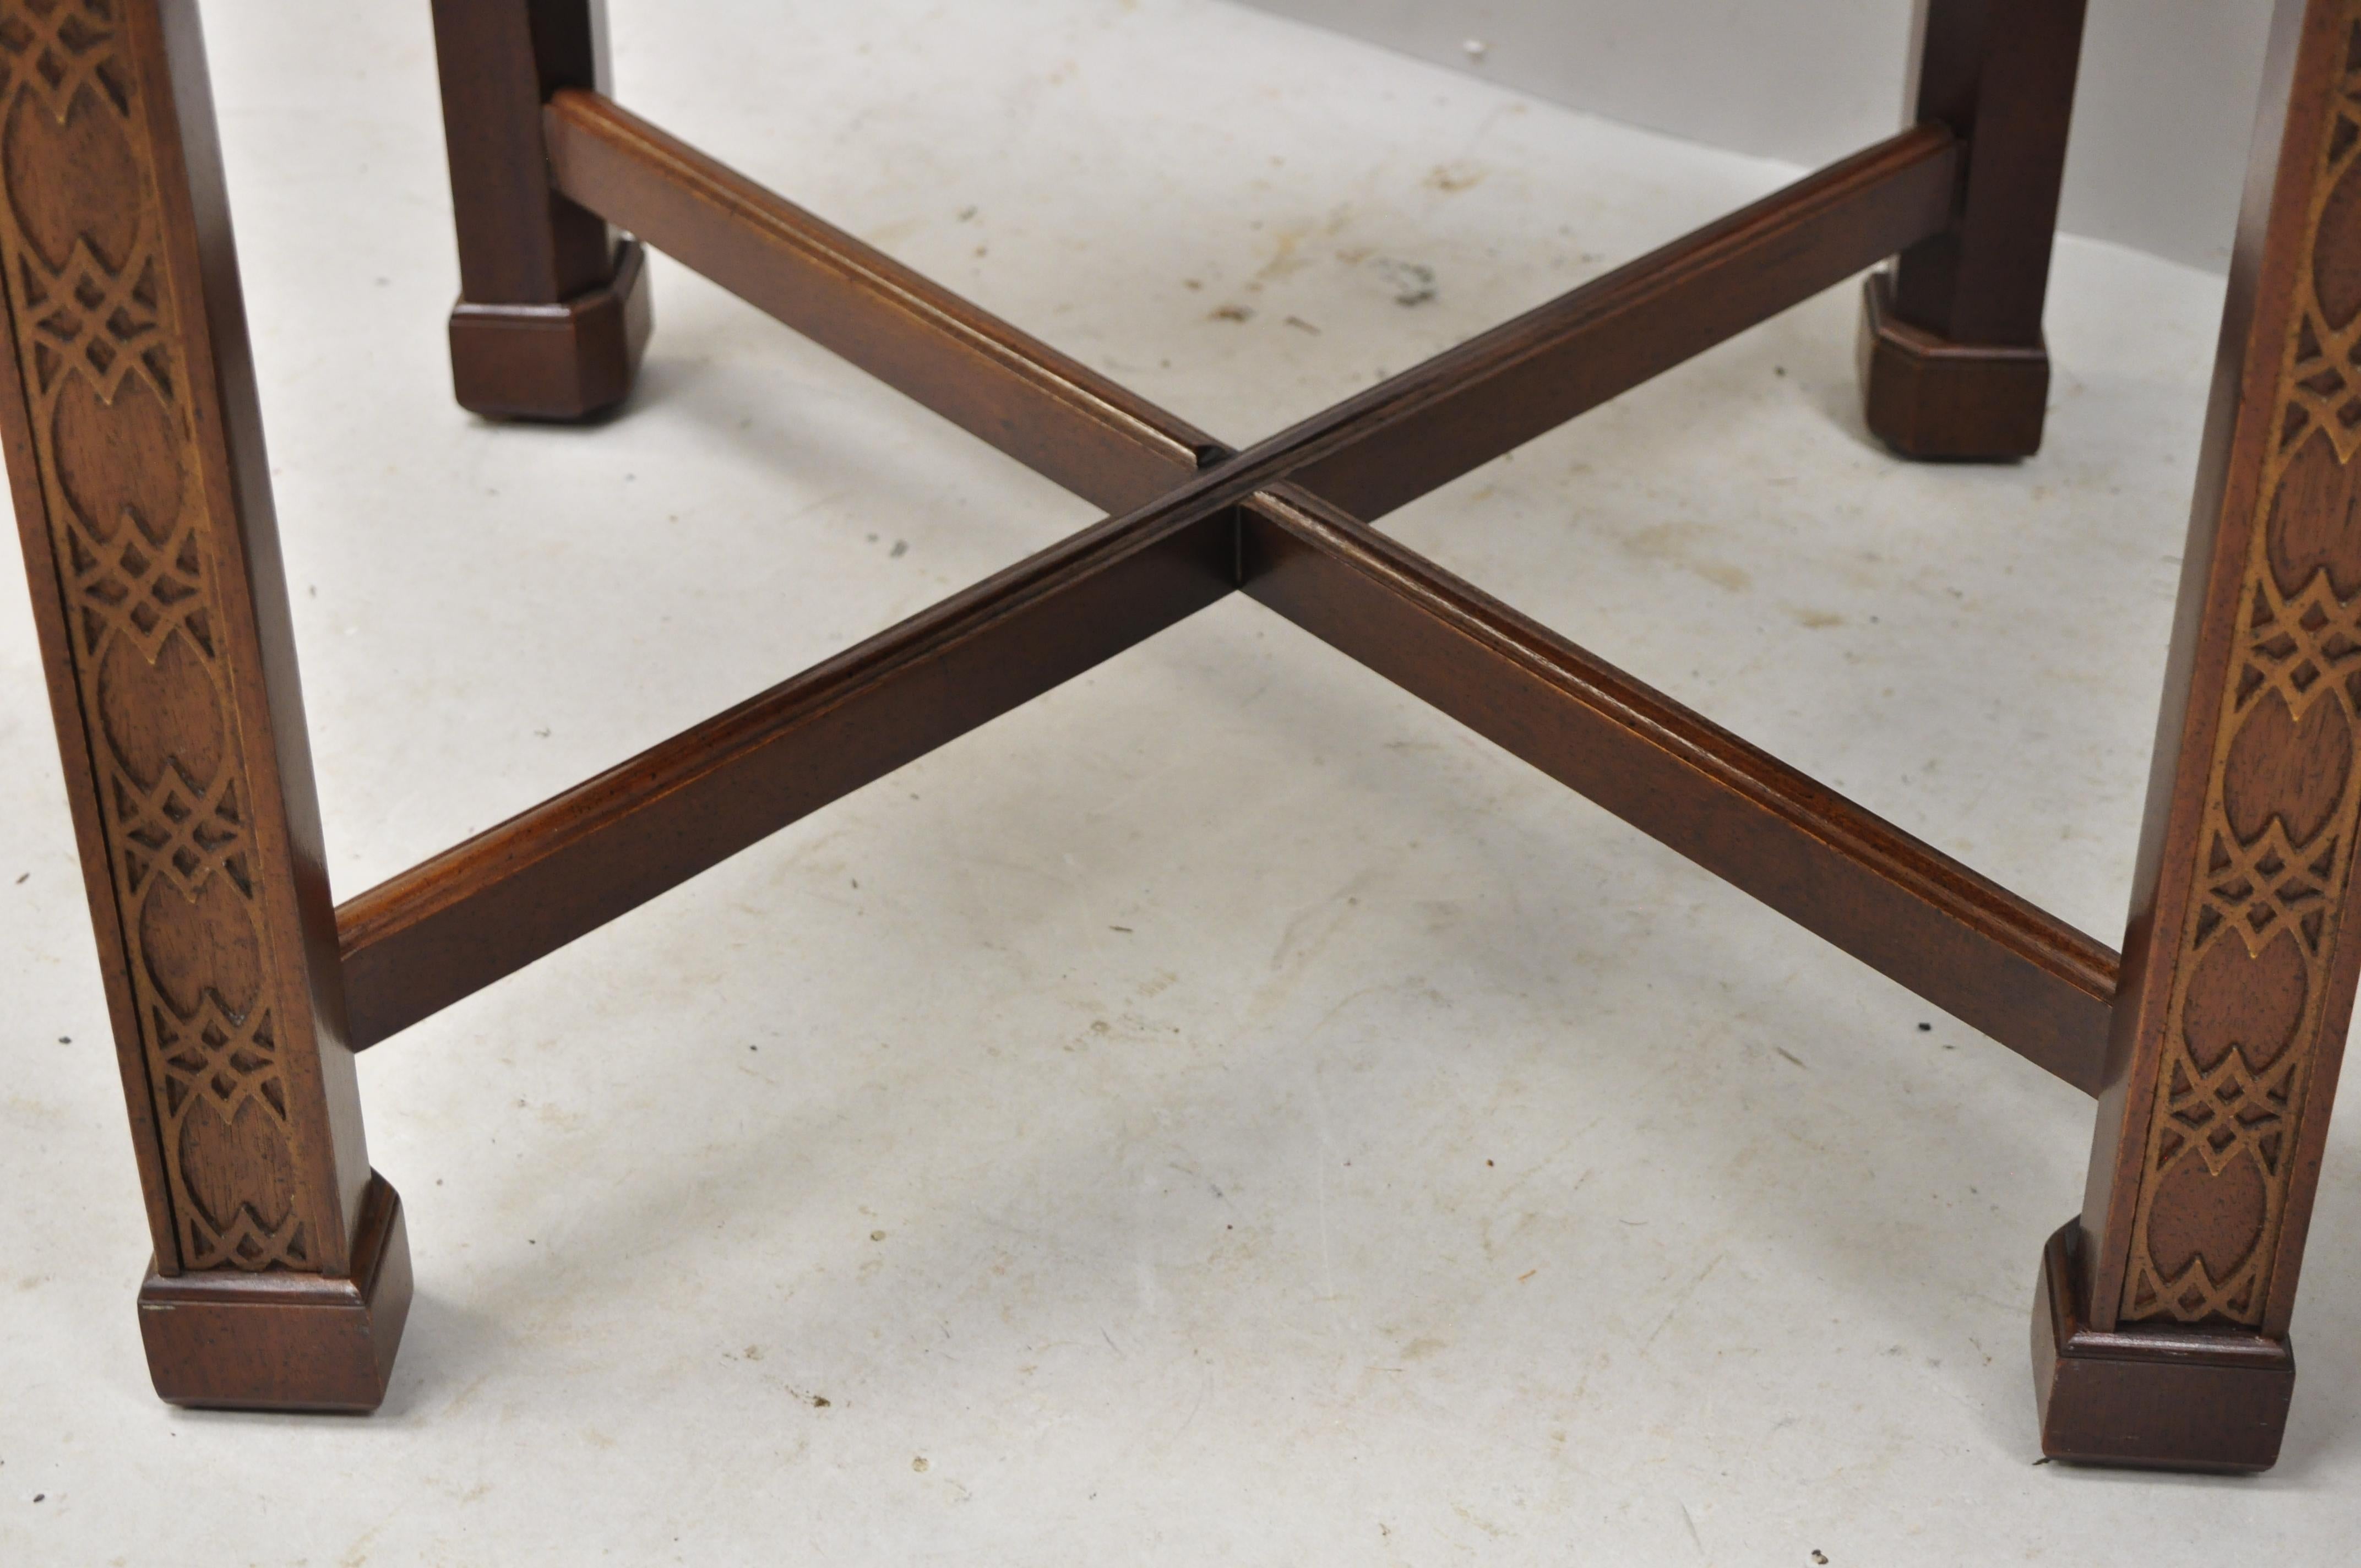 20th Century Ethan Allen Chinese Chippendale Style Mahogany Fretwork Square Stools, a Pair